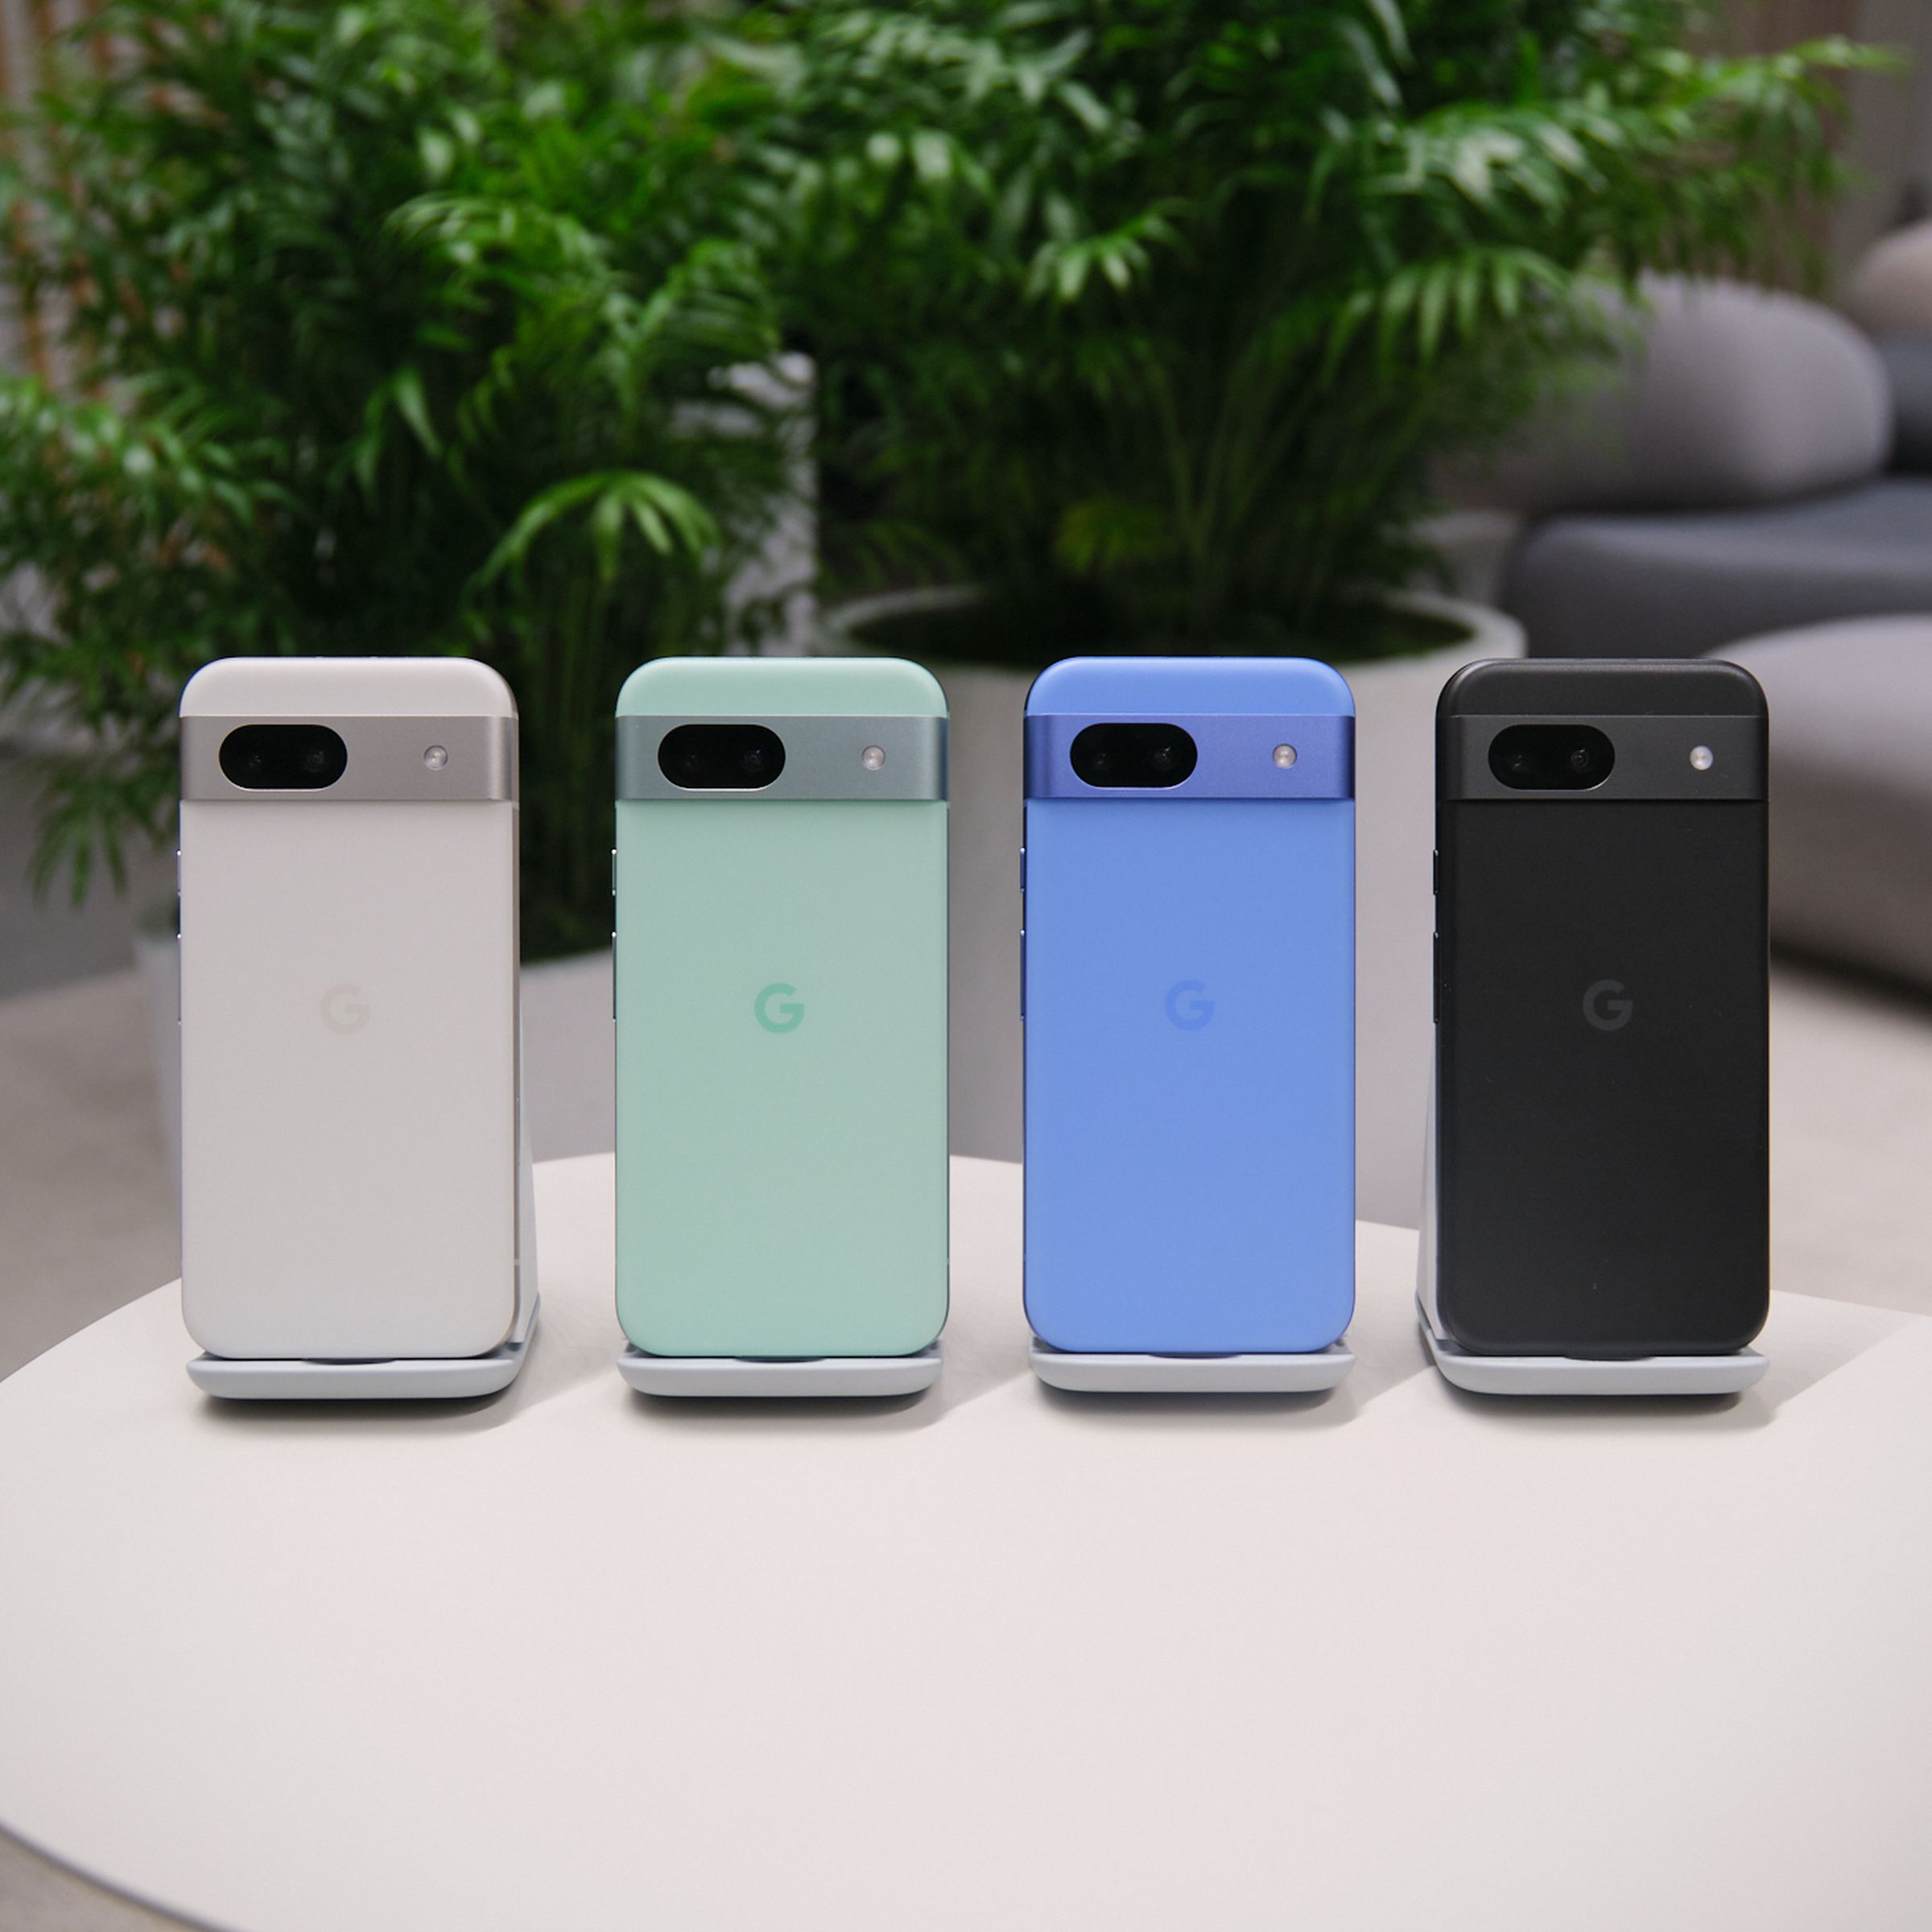 Pixel 8A in four color options: aloe, bay, obsidian, and porcelain.